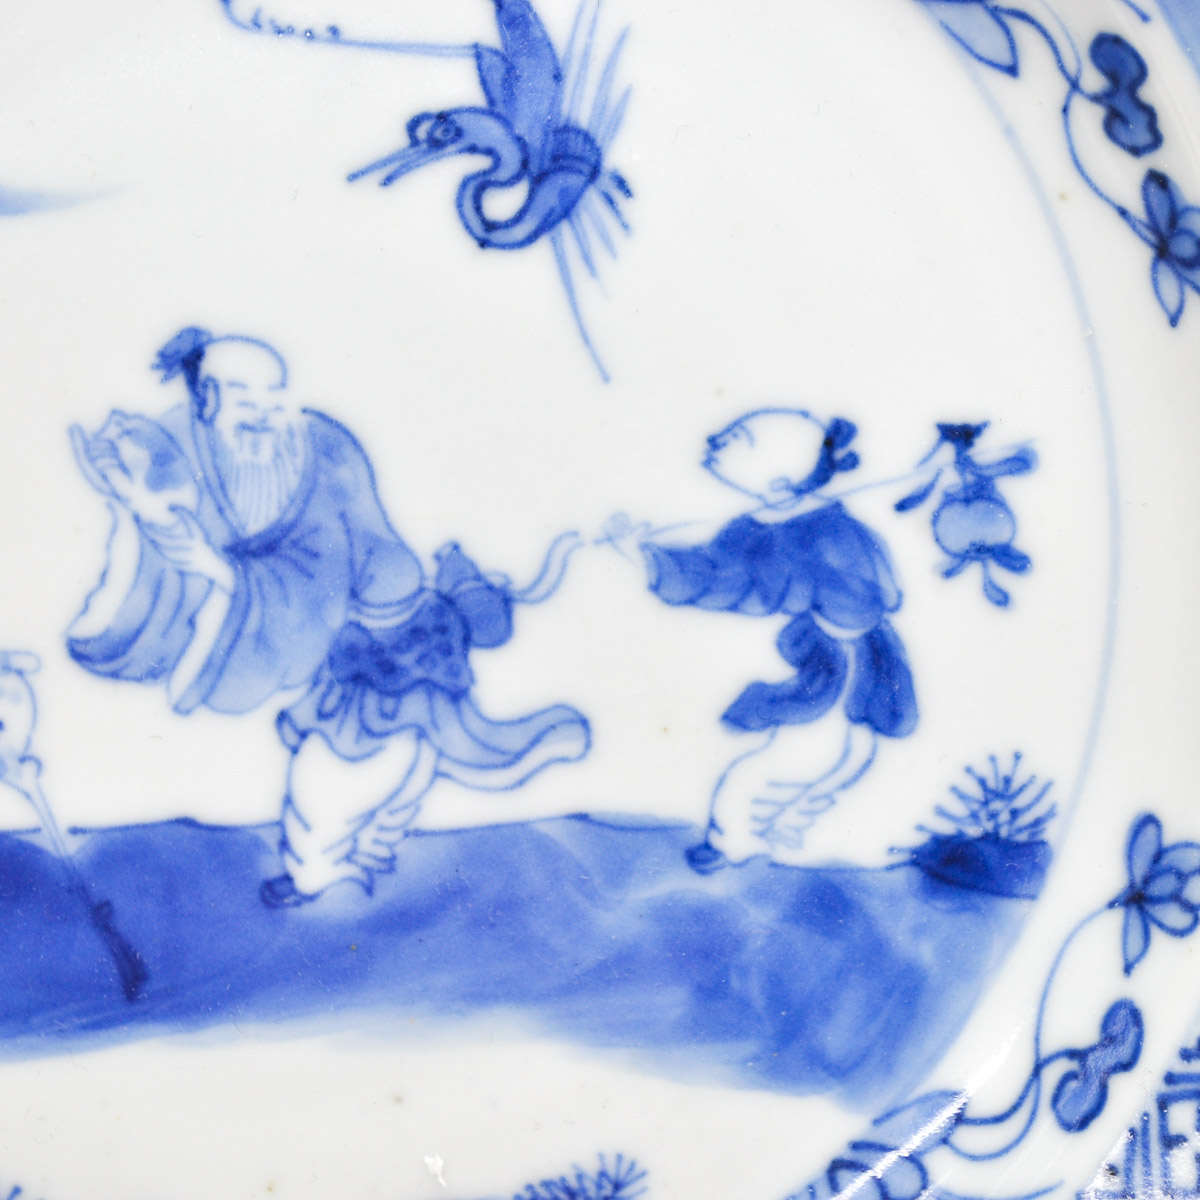 A Blue and White Decor Plate - Image 3 of 5